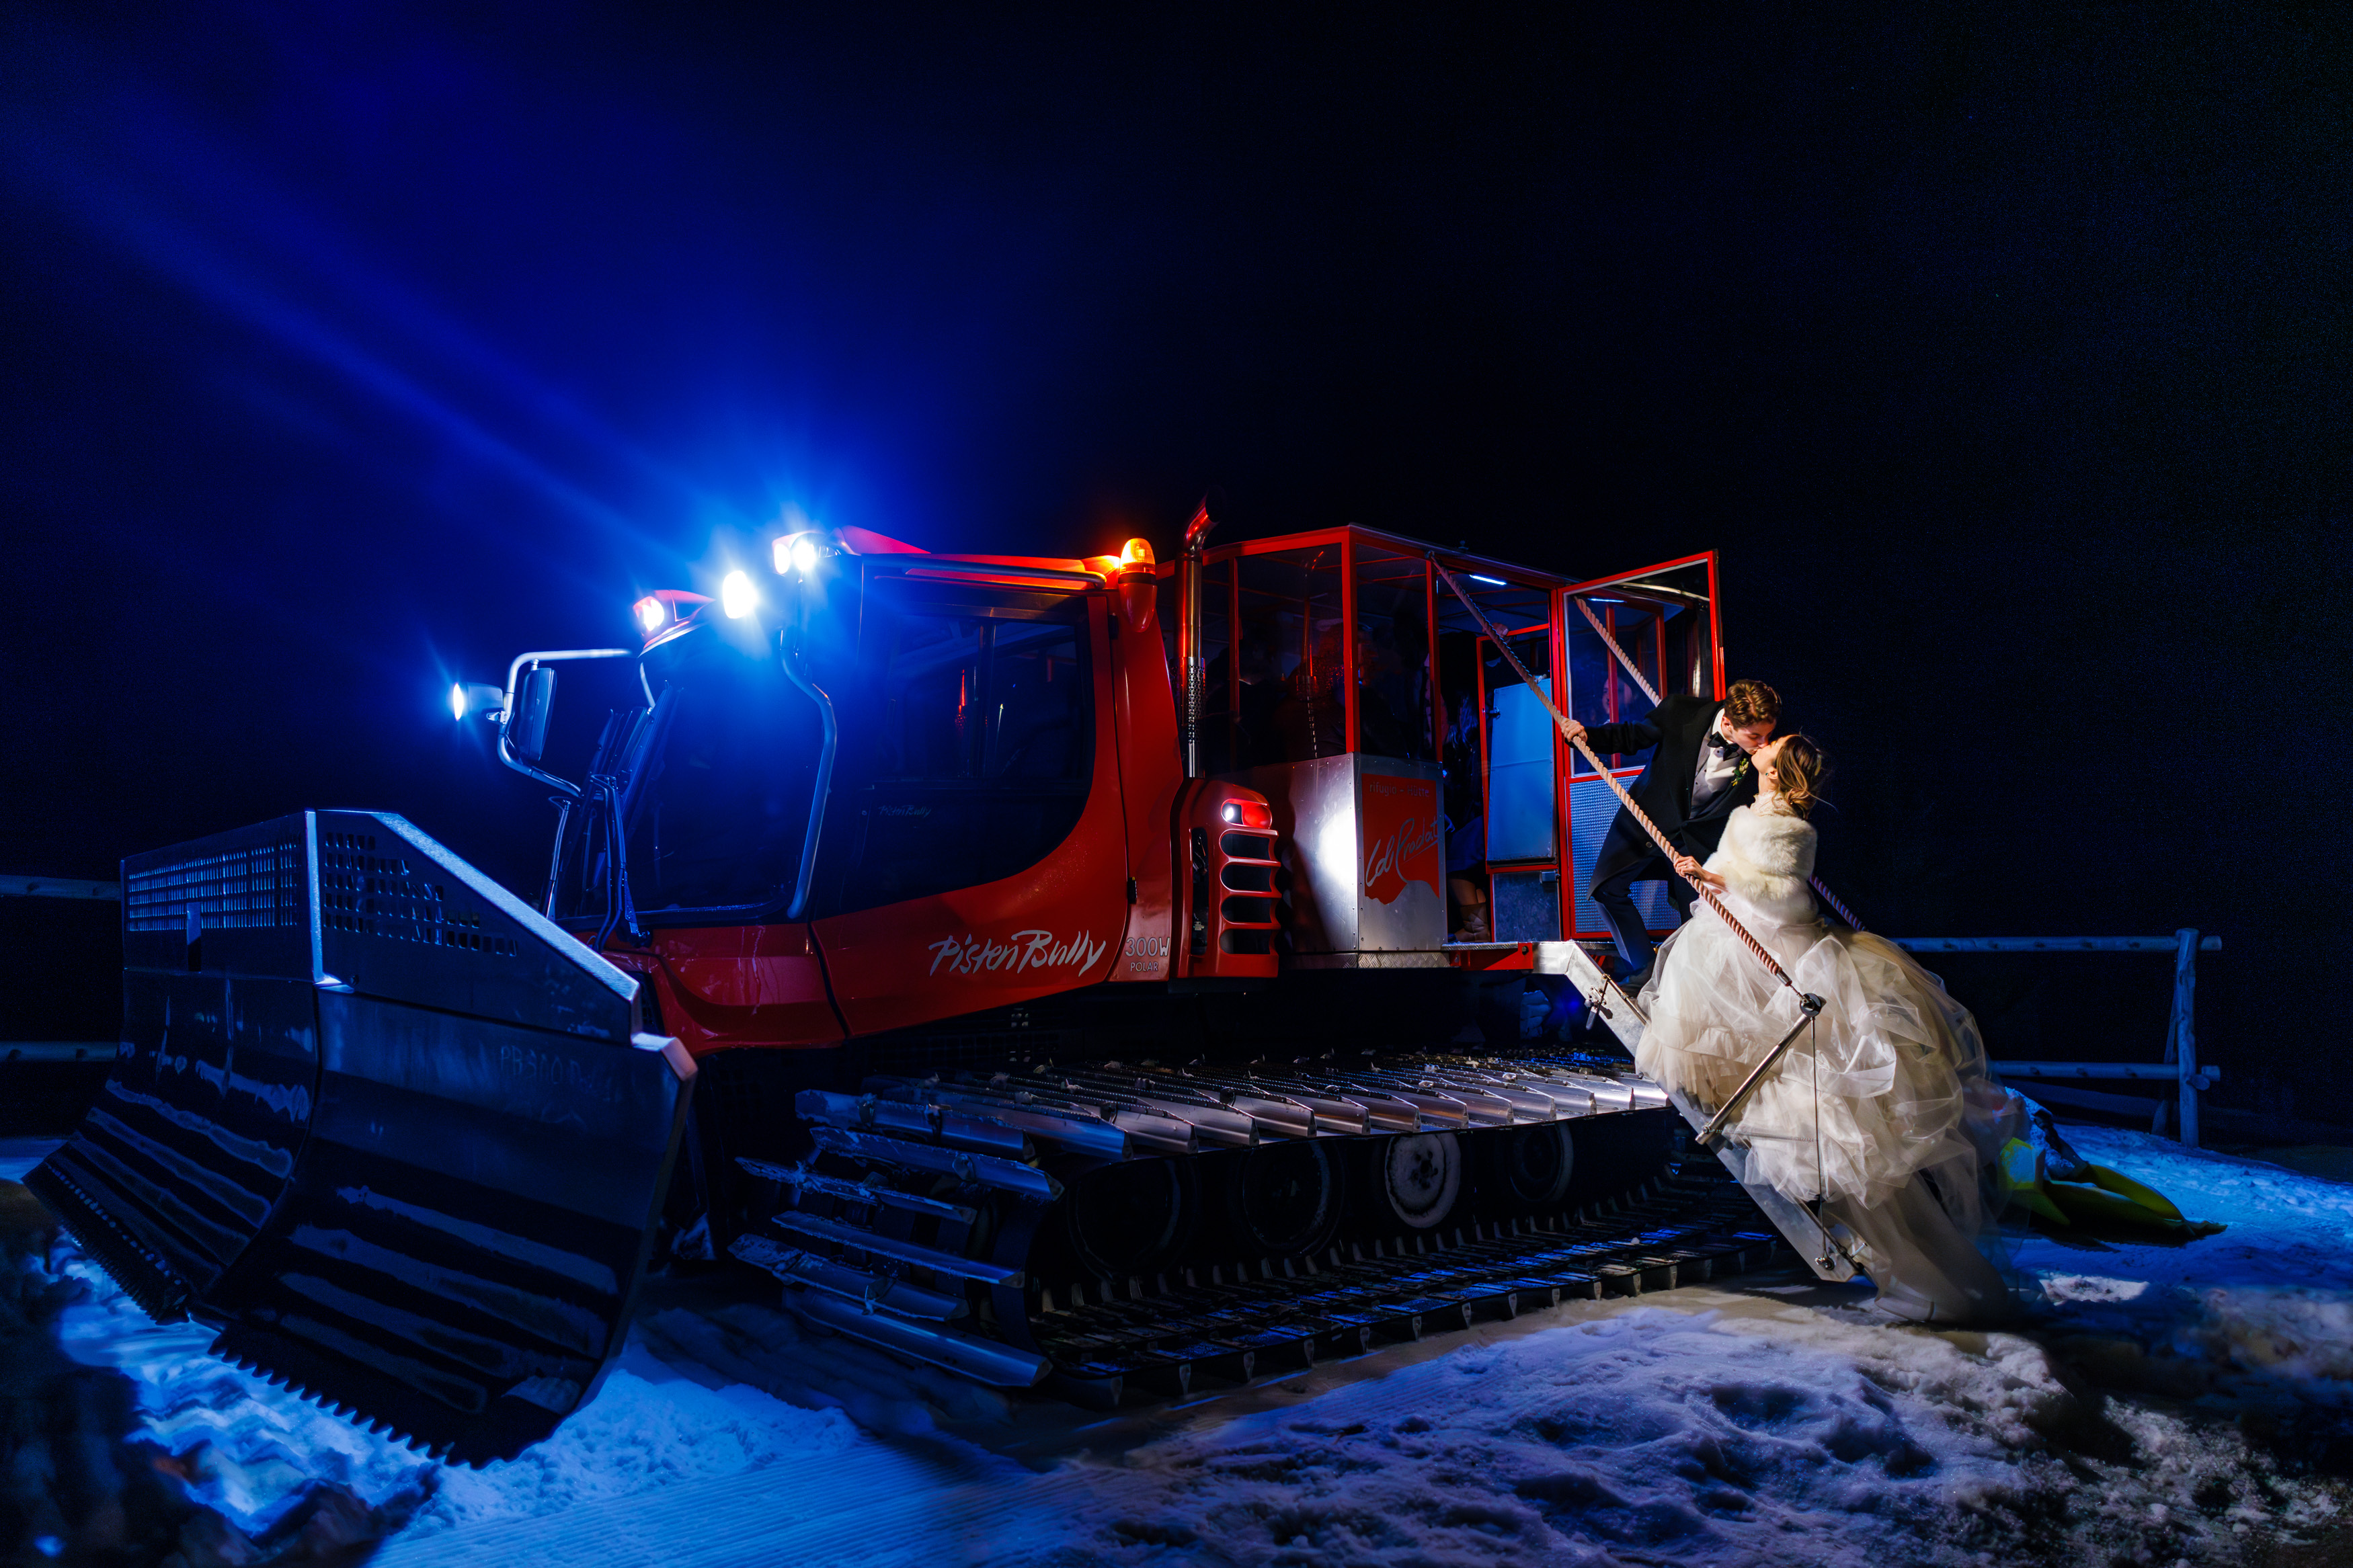 The newlywed couple hops in the snowcat for their ride back down the mountain following their beautiful Col Pradat Wedding.